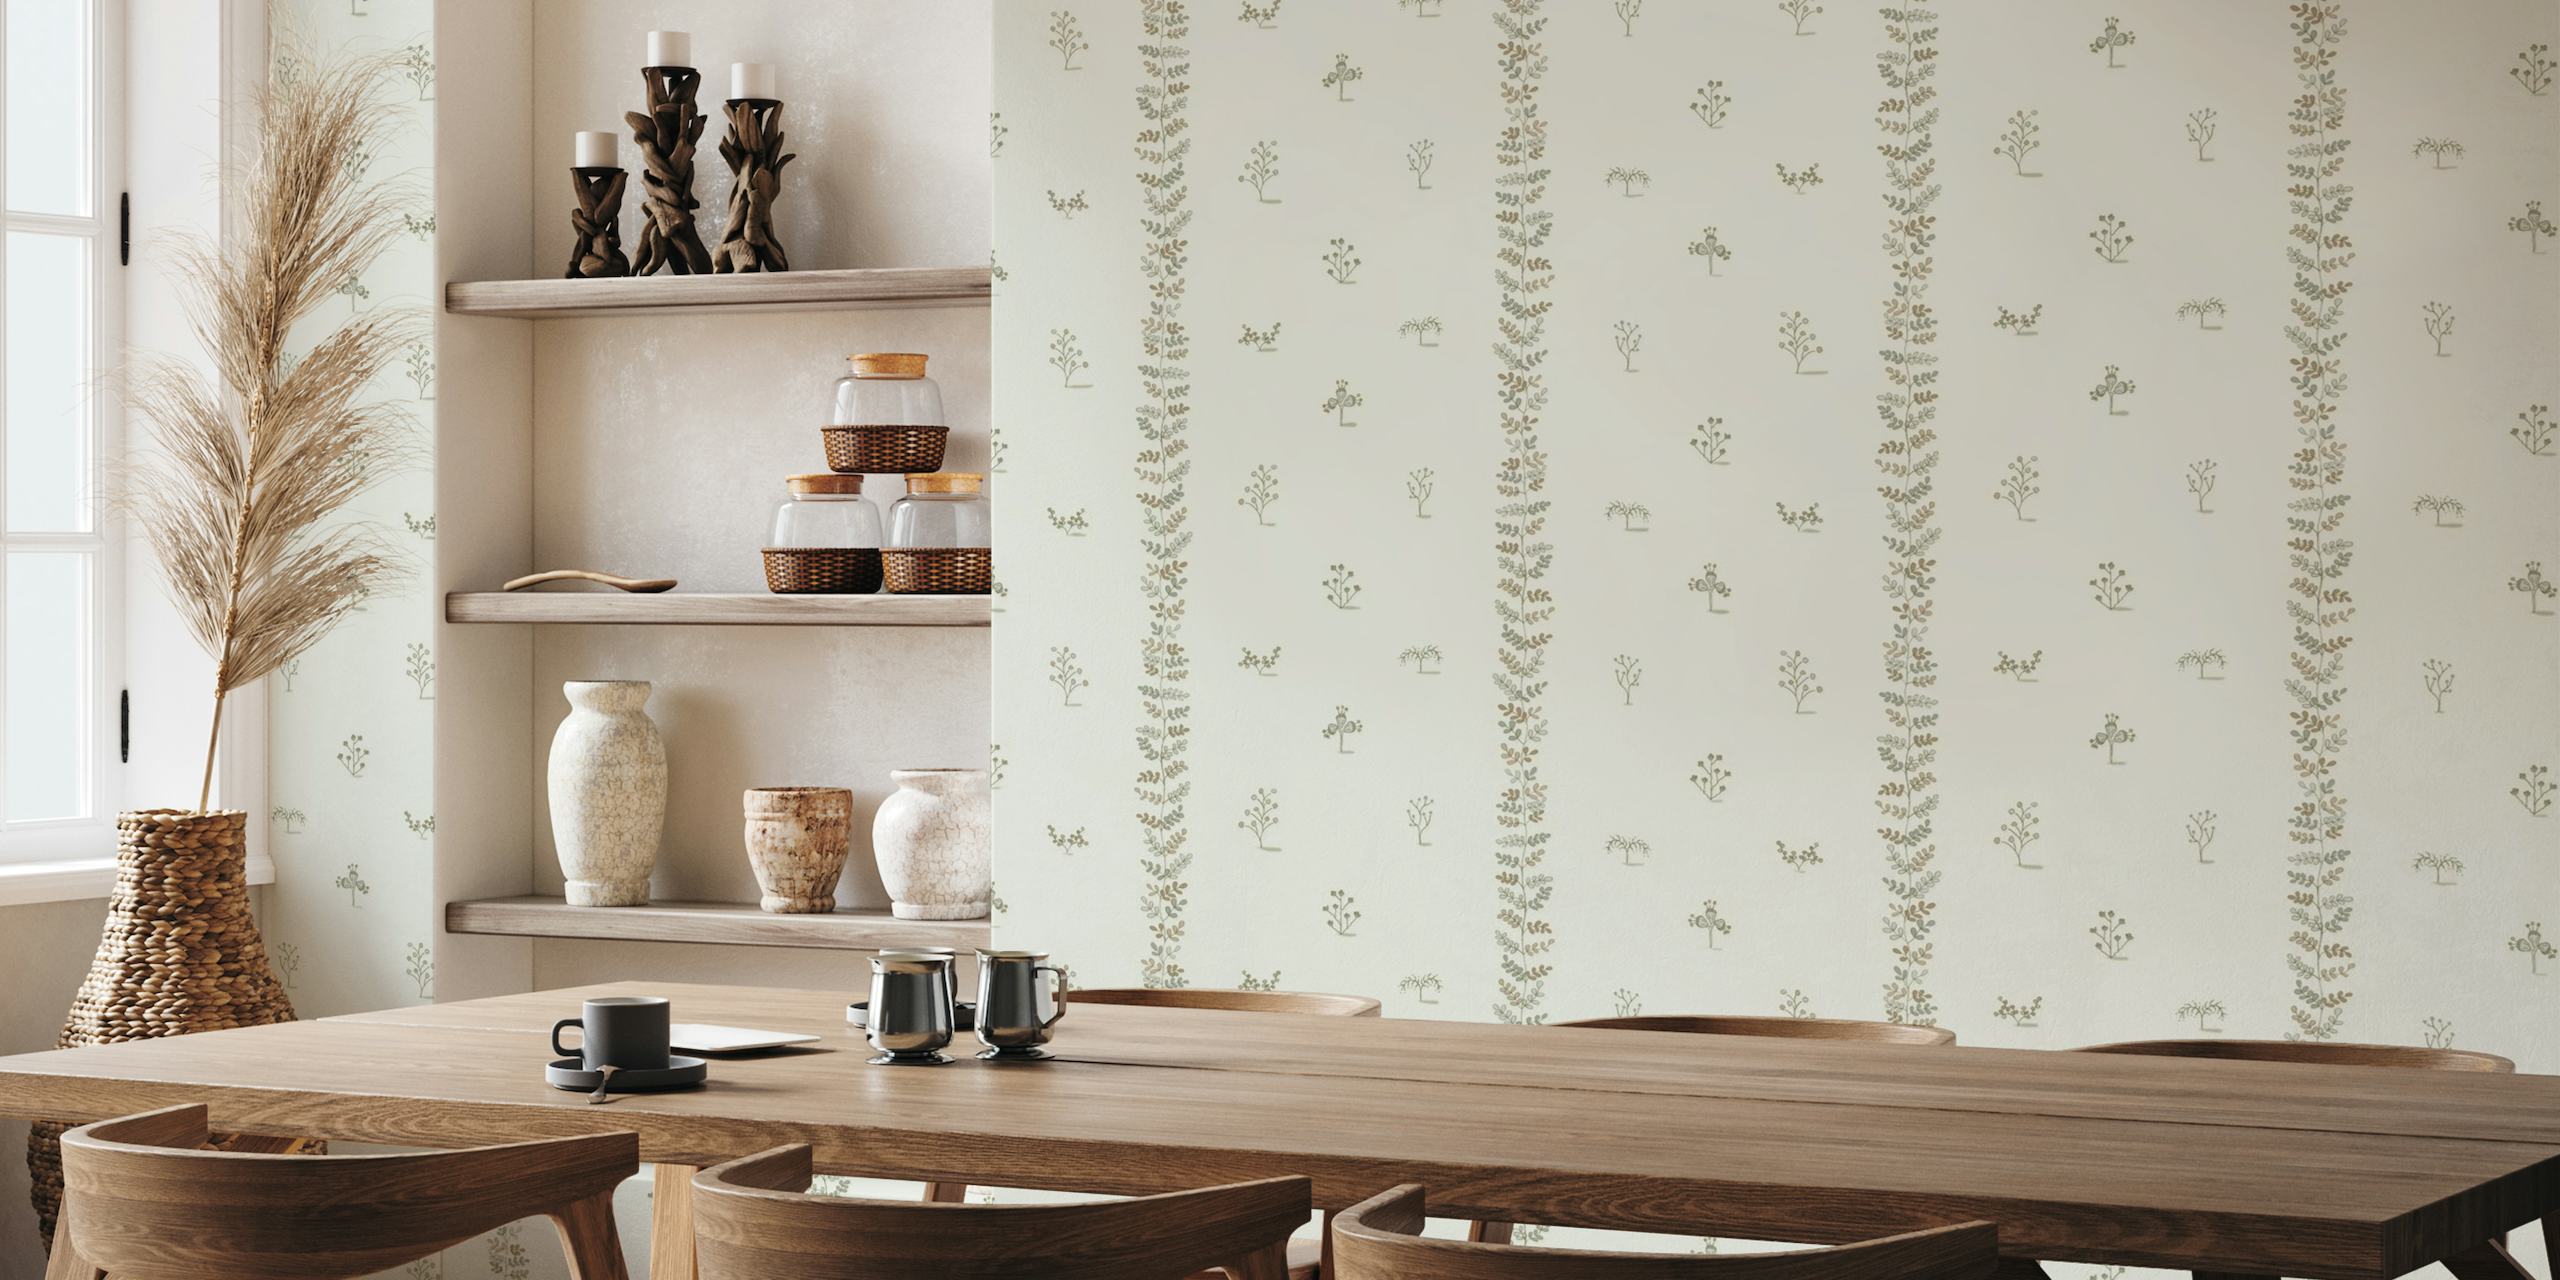 Subtle floral pattern wall mural in soft neutral tones